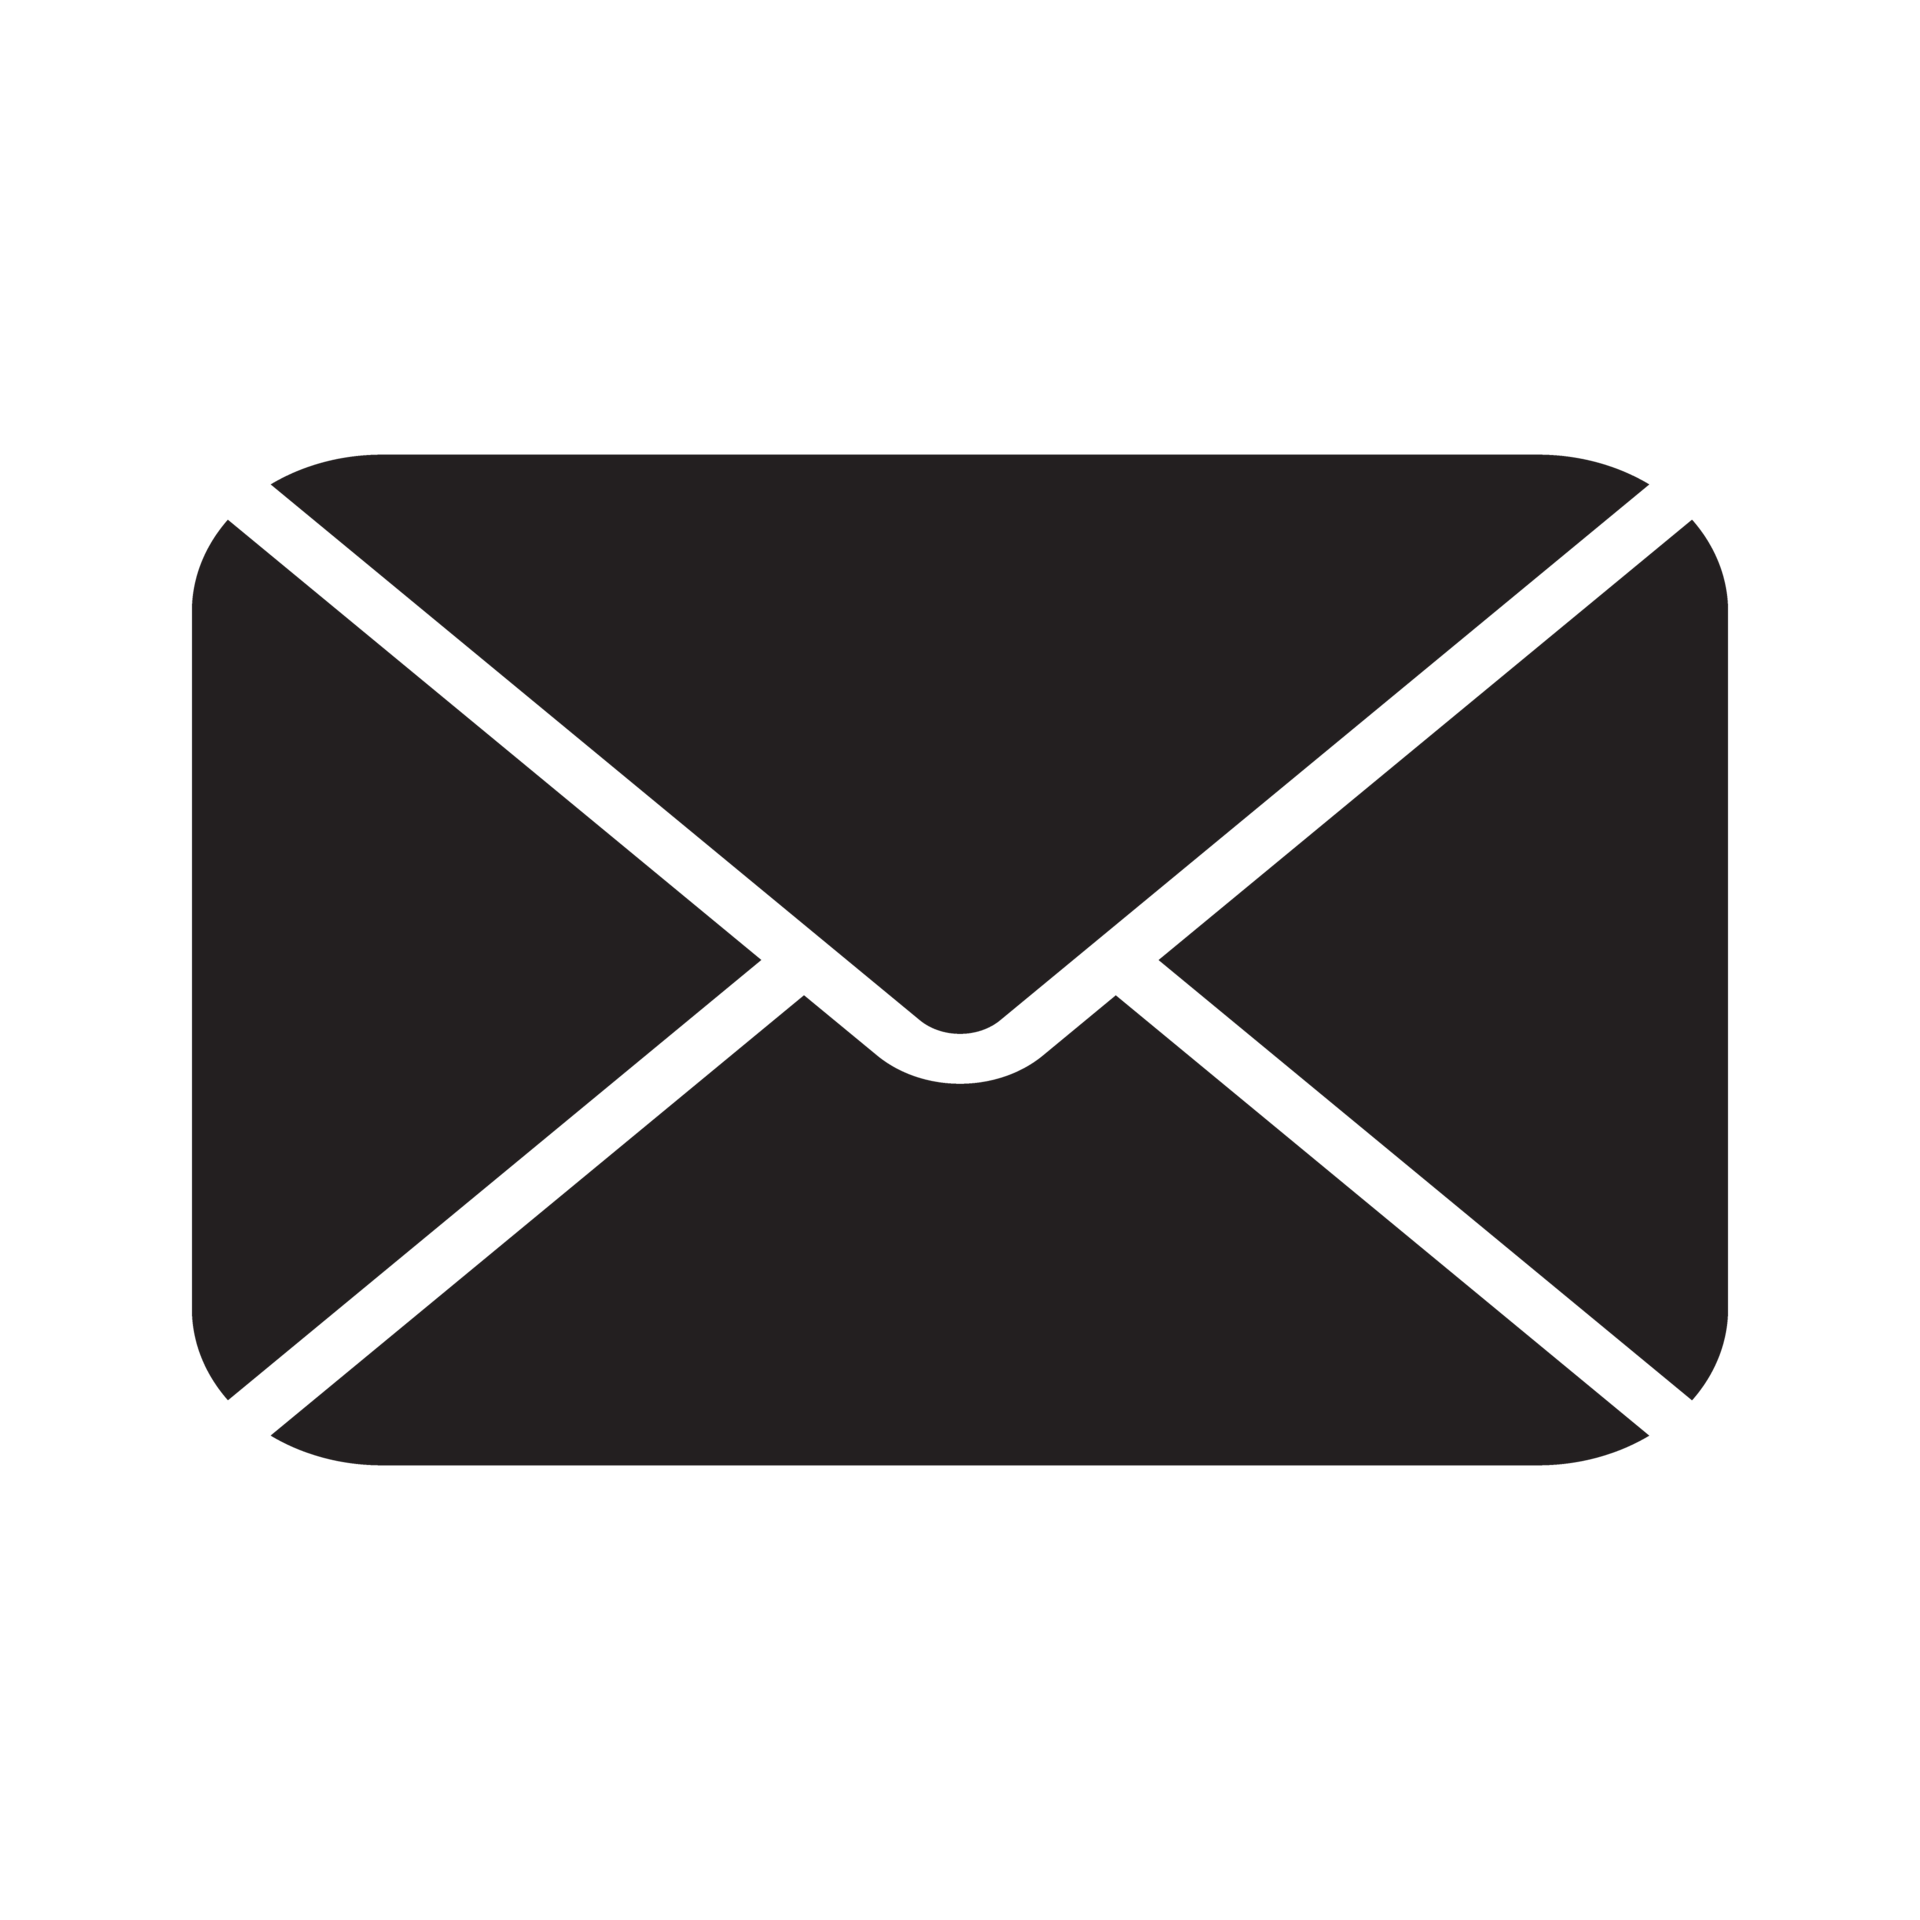 email and mail icon black 20009614 PNG